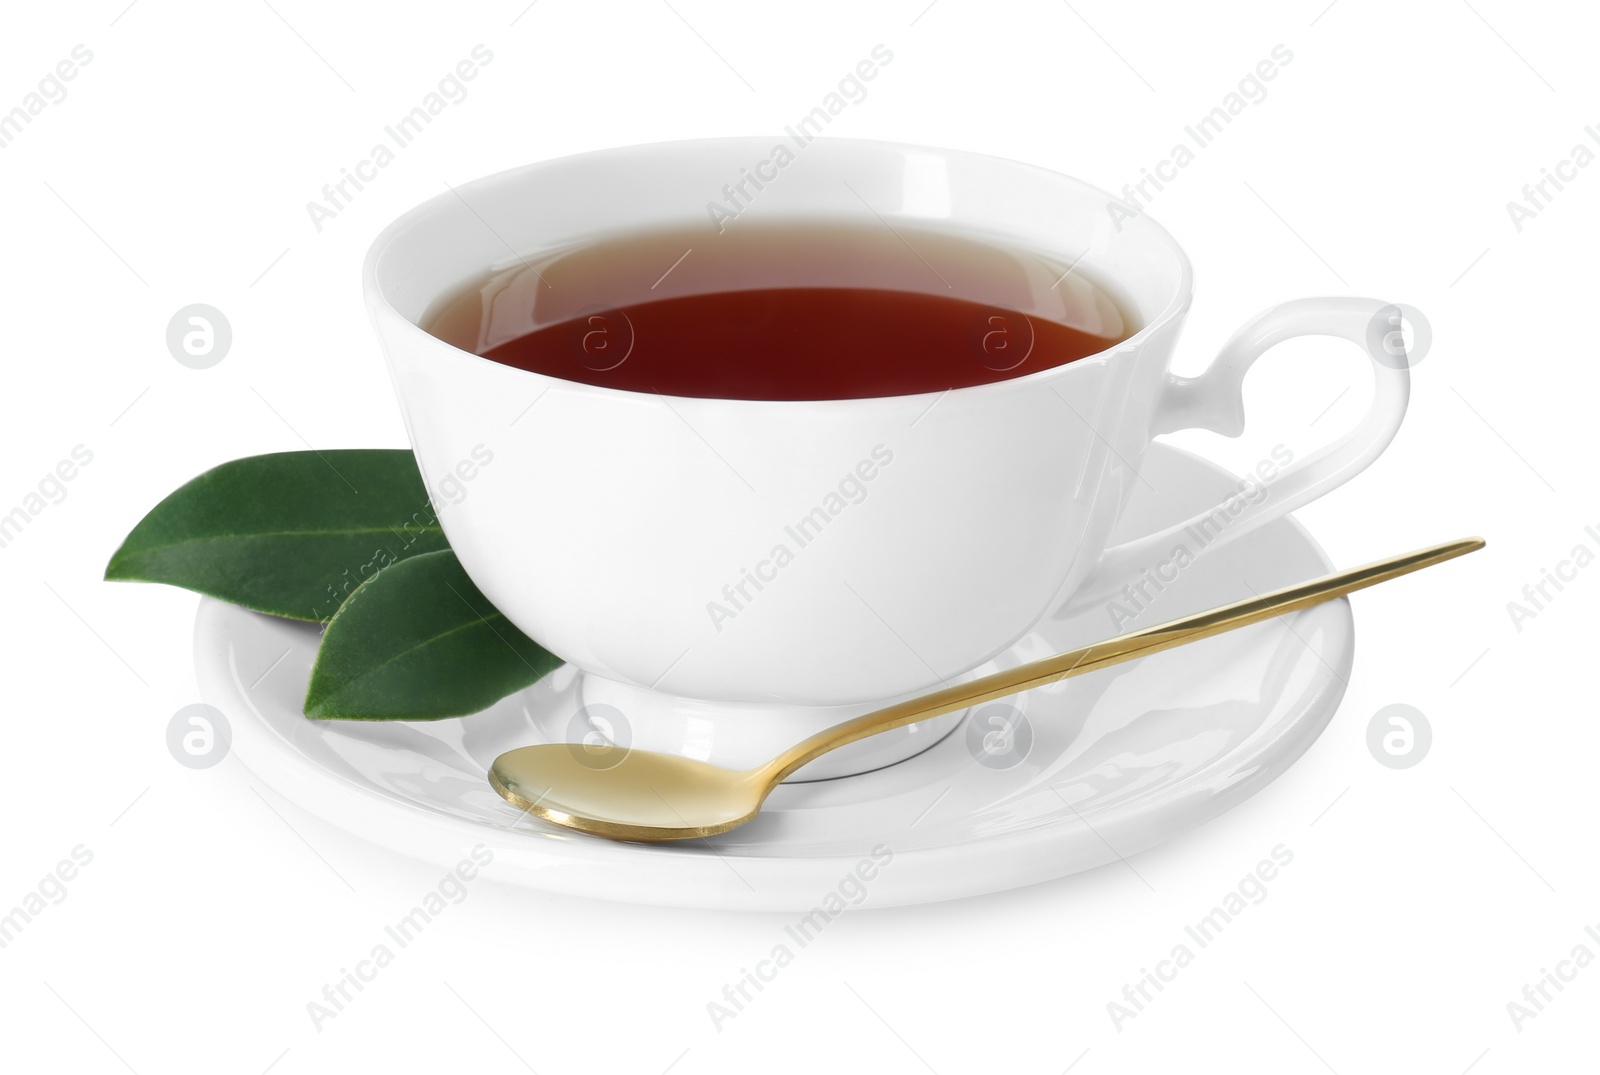 Photo of Aromatic tea in cup, golden spoon and green leaves isolated on white